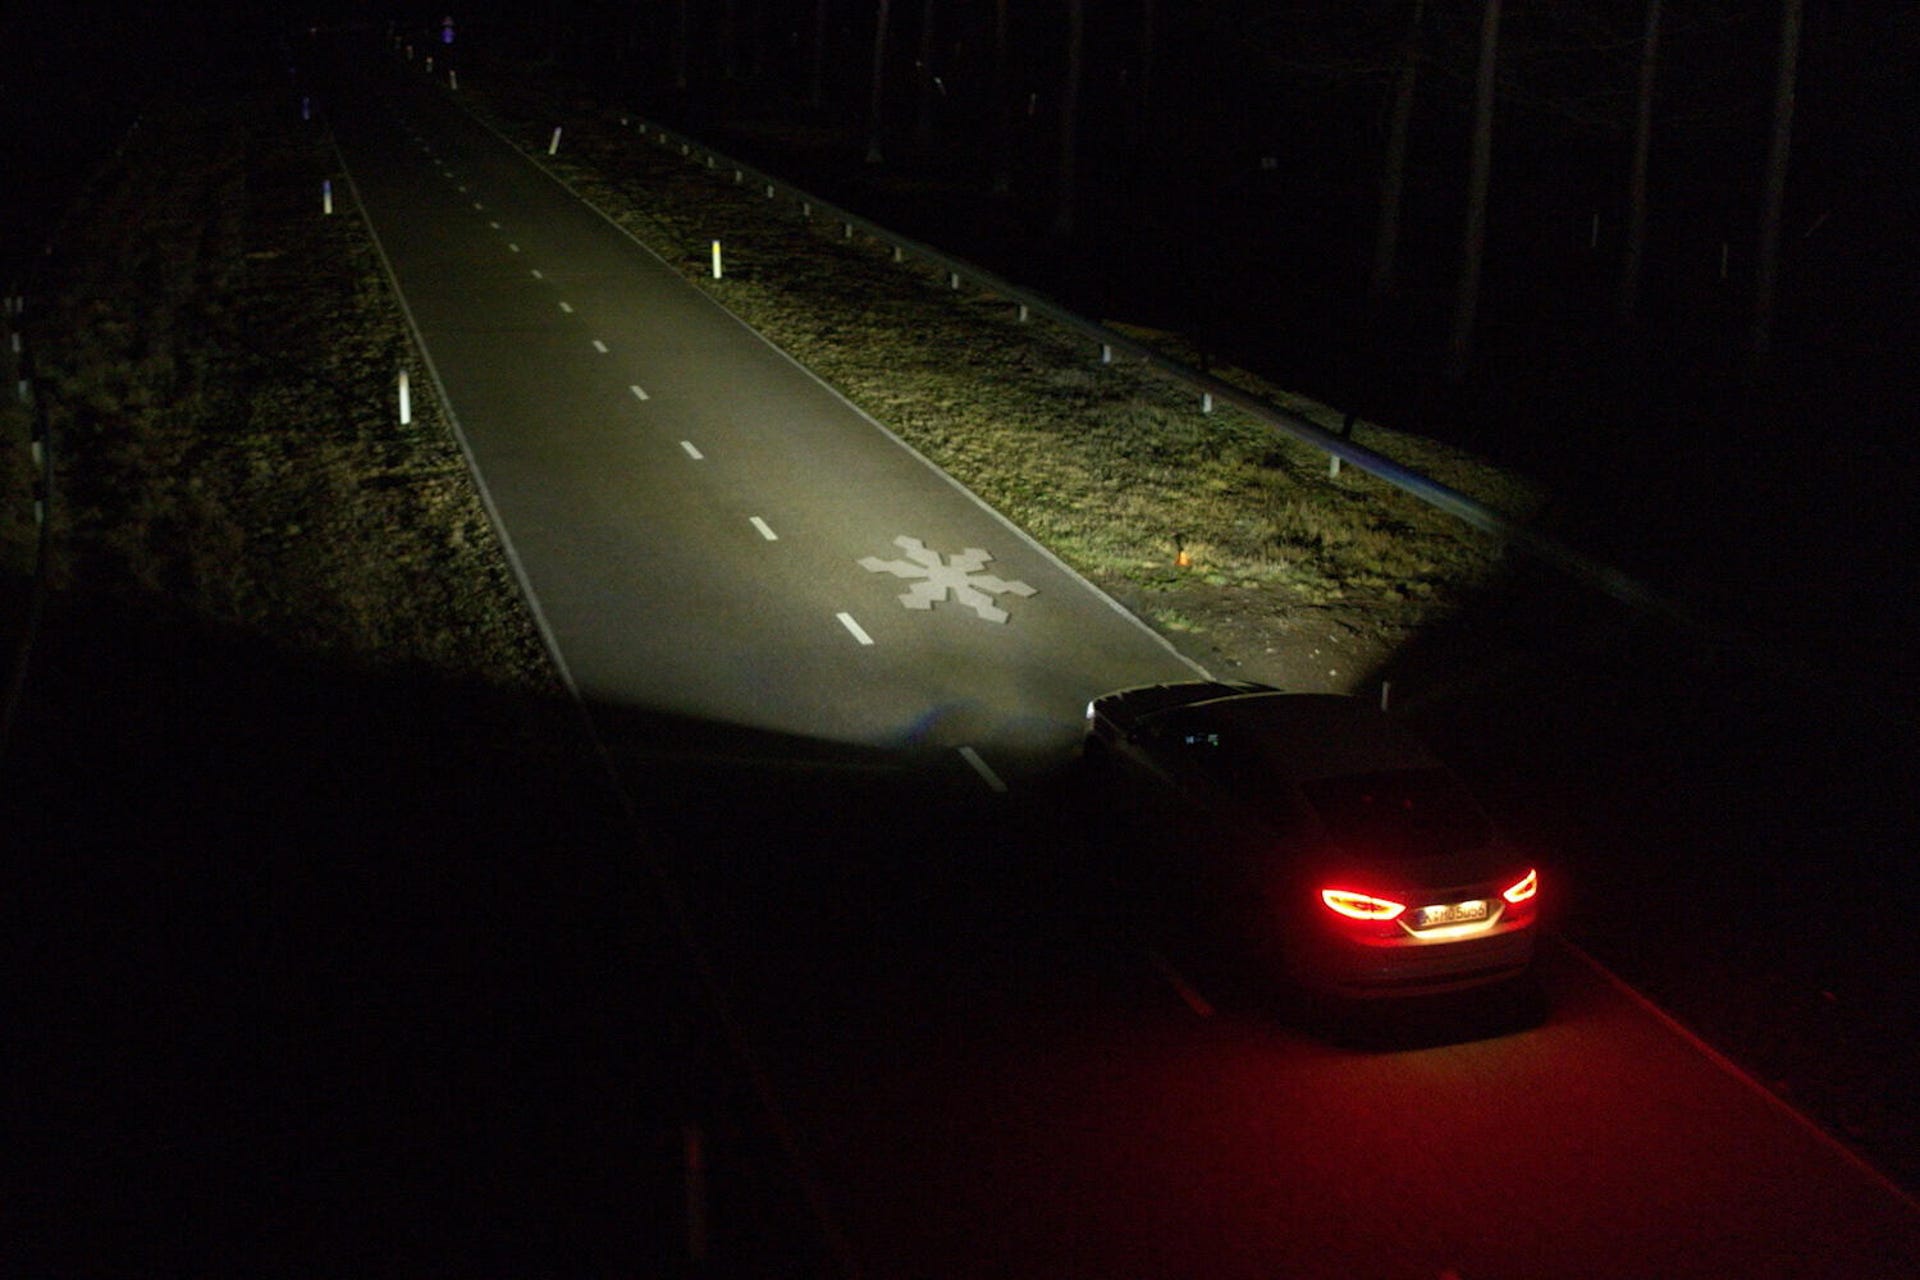 a car driving at night projects a snowflake onto the road from its headlights